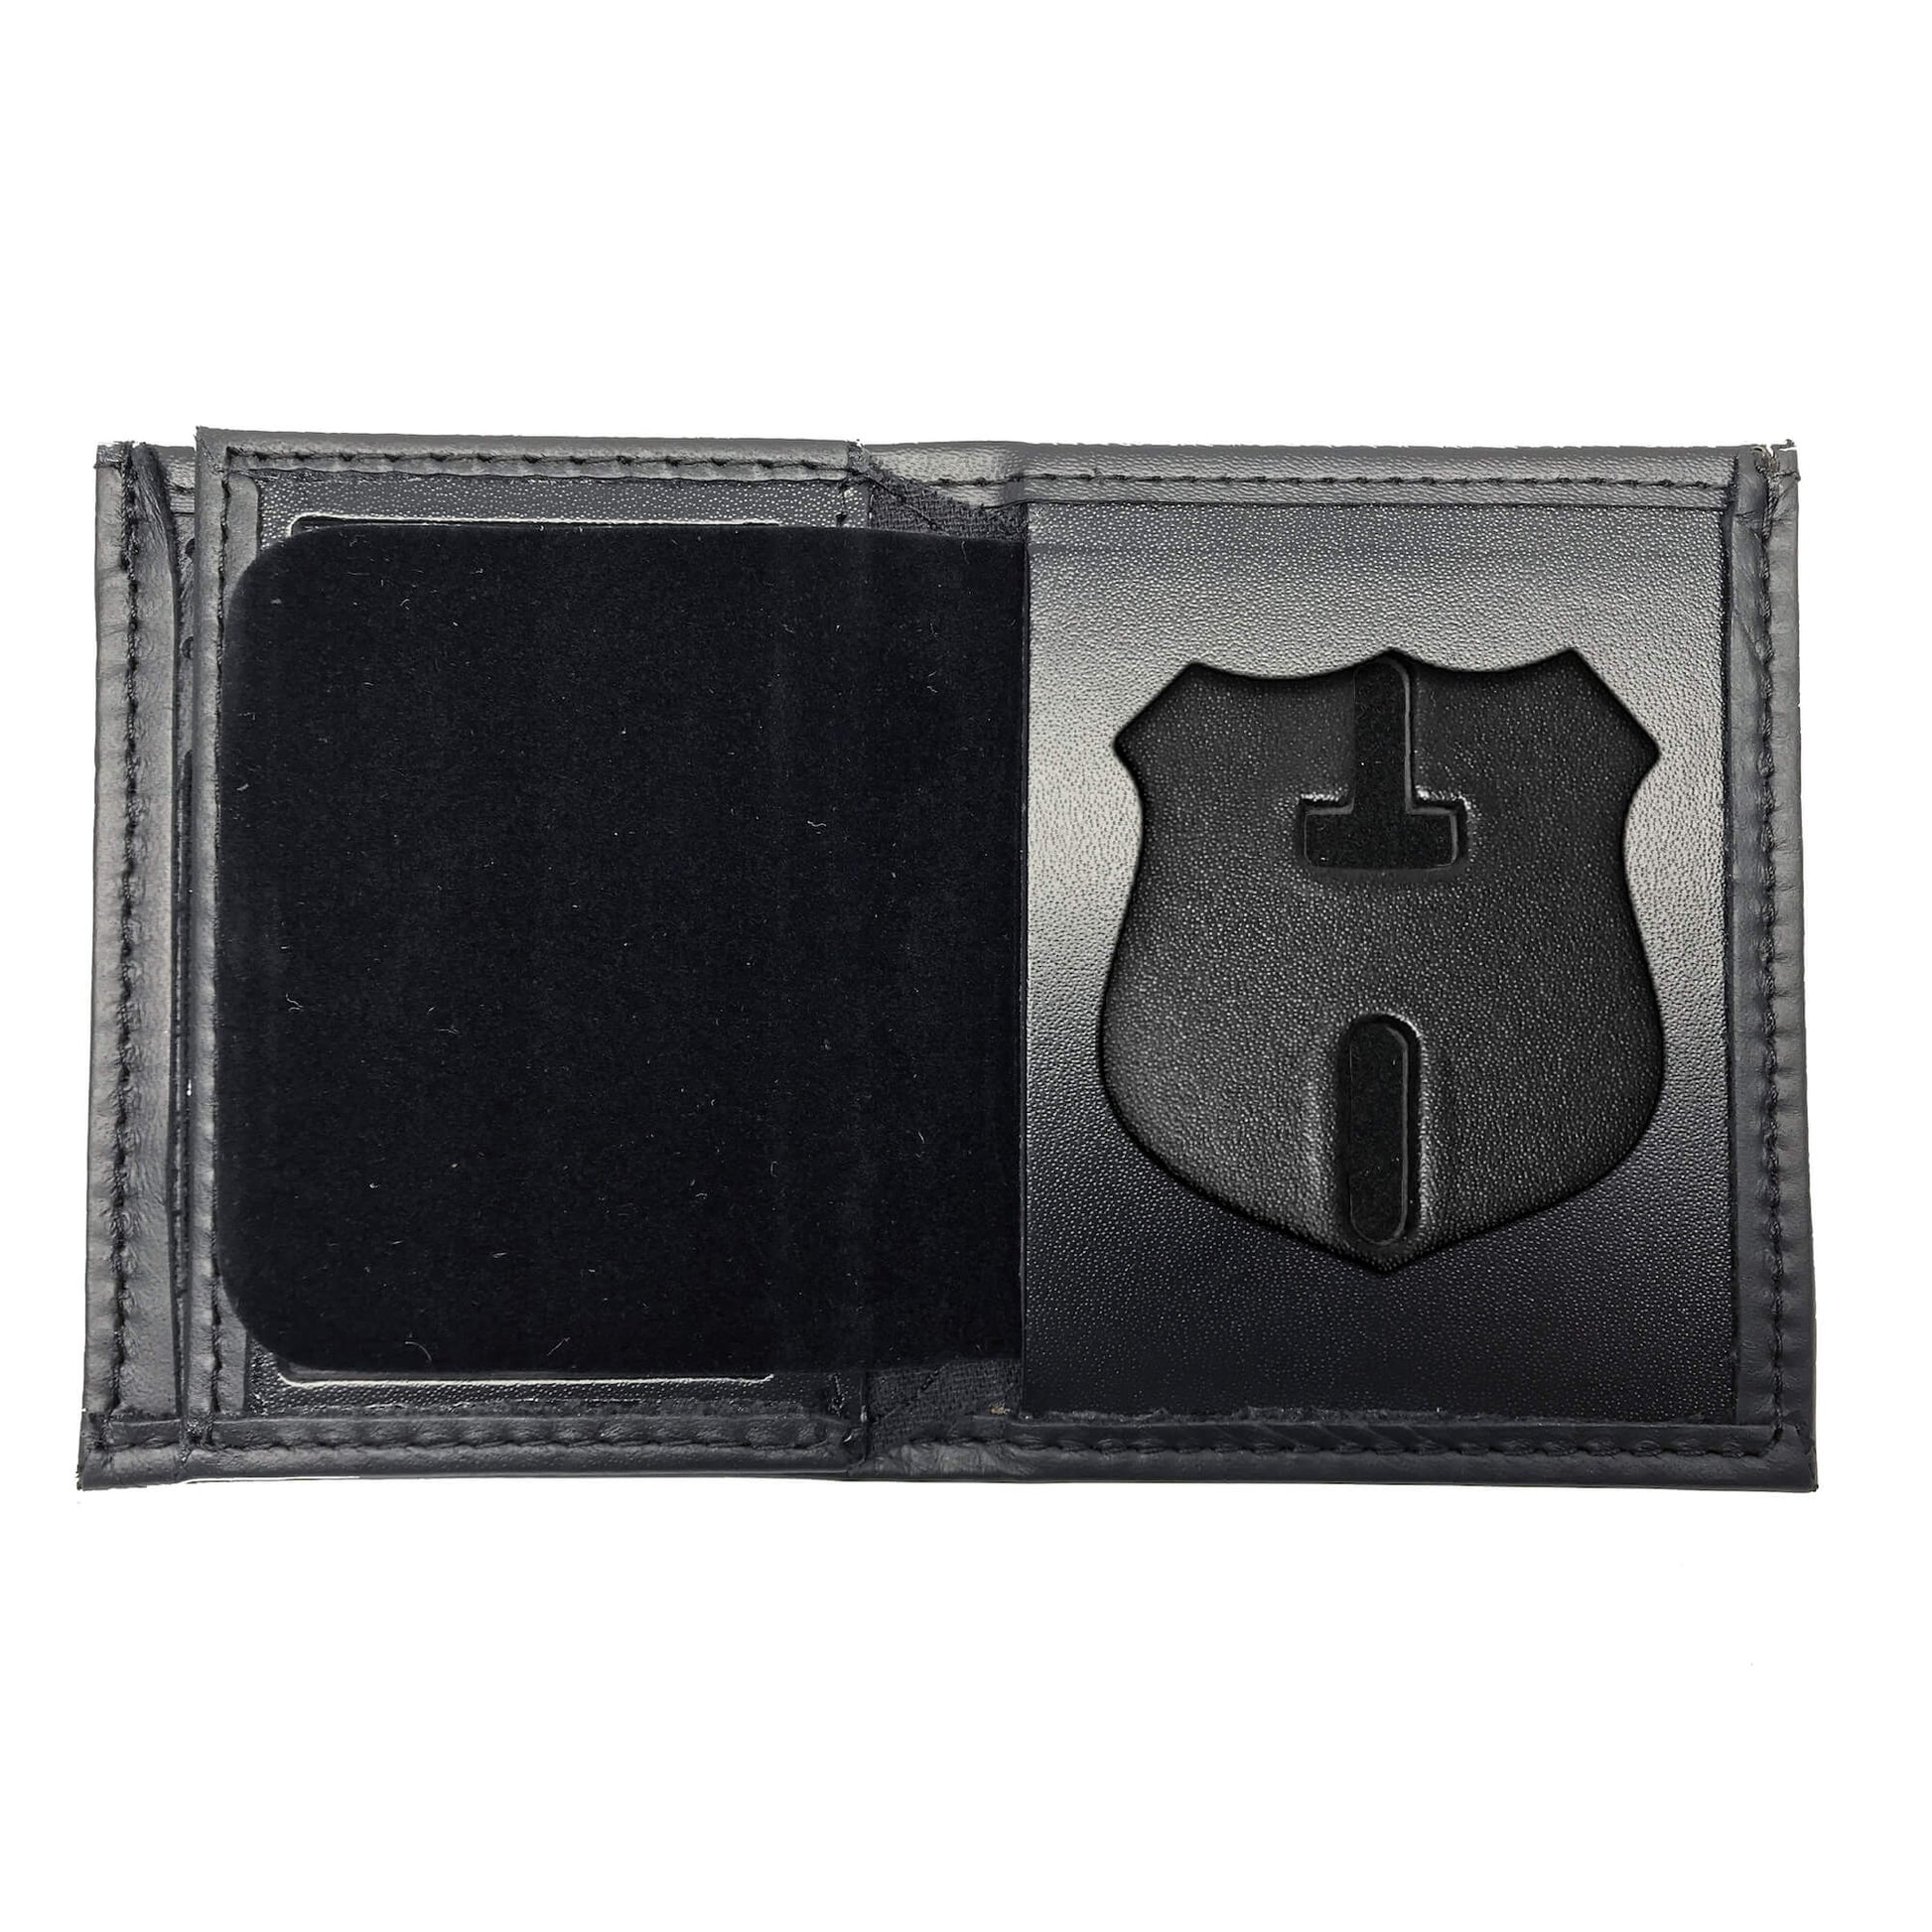 New York Police Department (NYPD) Officer Bifold Hidden Badge Wallet-Perfect Fit-911 Duty Gear USA